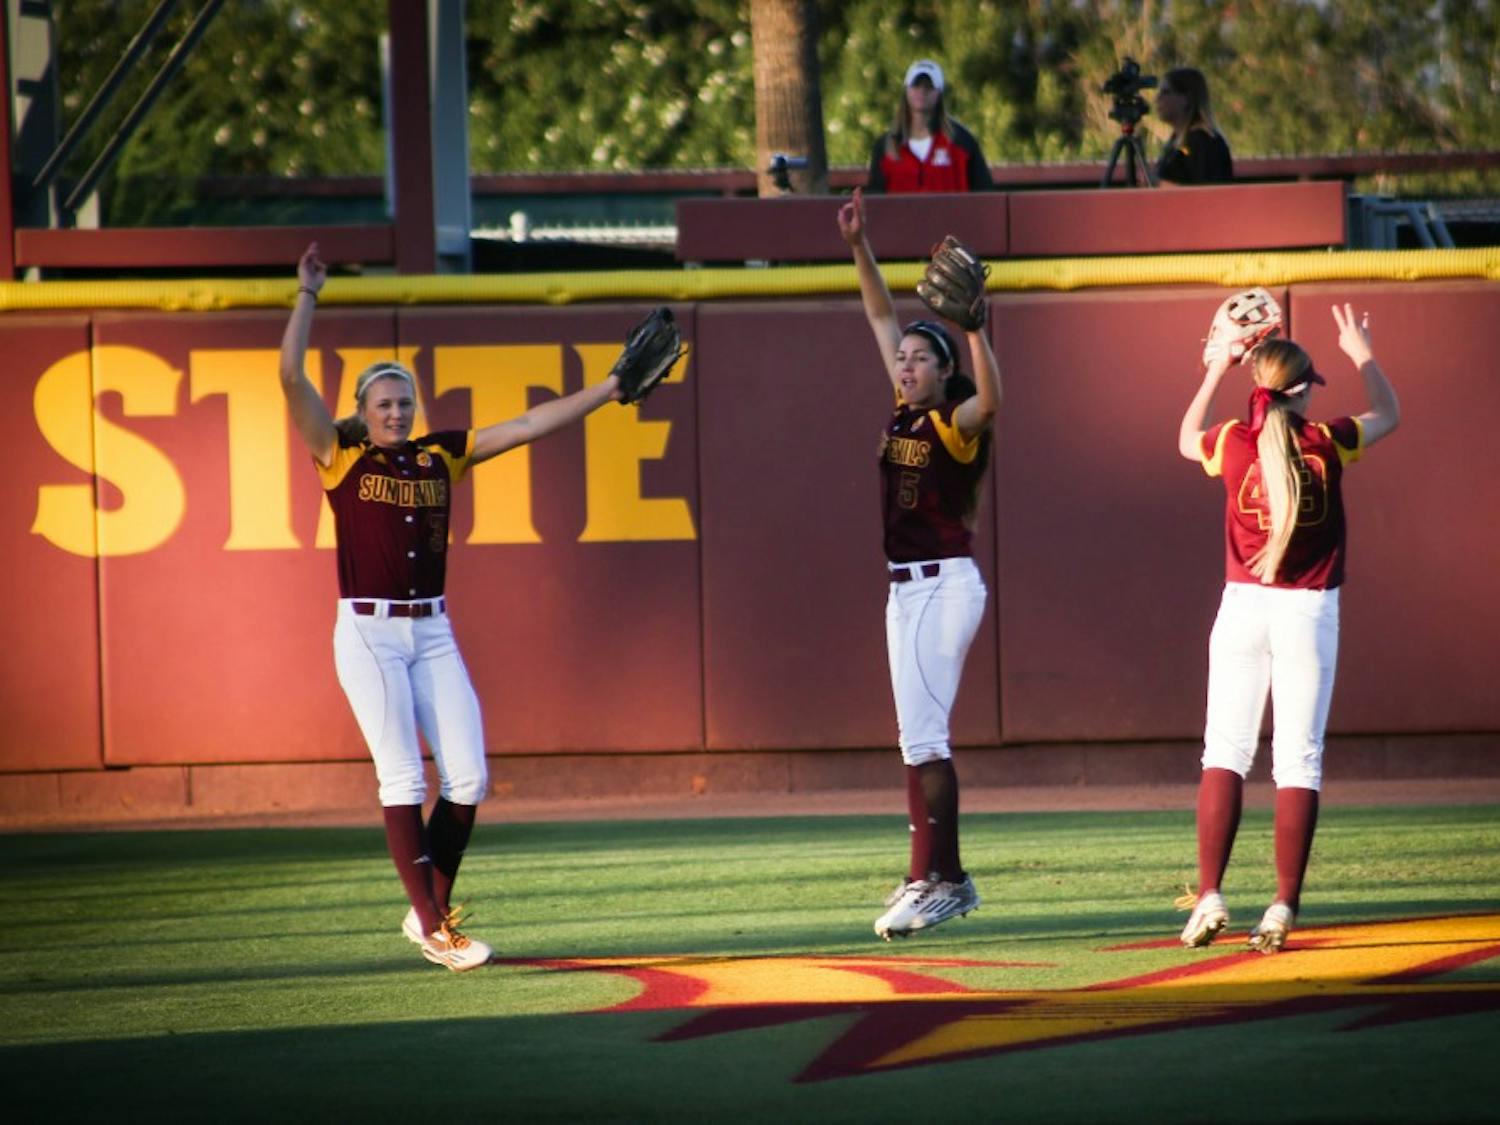 Senior Abby Spiel (#3), Senior Jennifer Soria (#5), and Sophomore Nichole Chilson (#49) huddle together in the outfield and then explode out in team spirit at the ASU vs Arizona softball game on March 18, 2016.